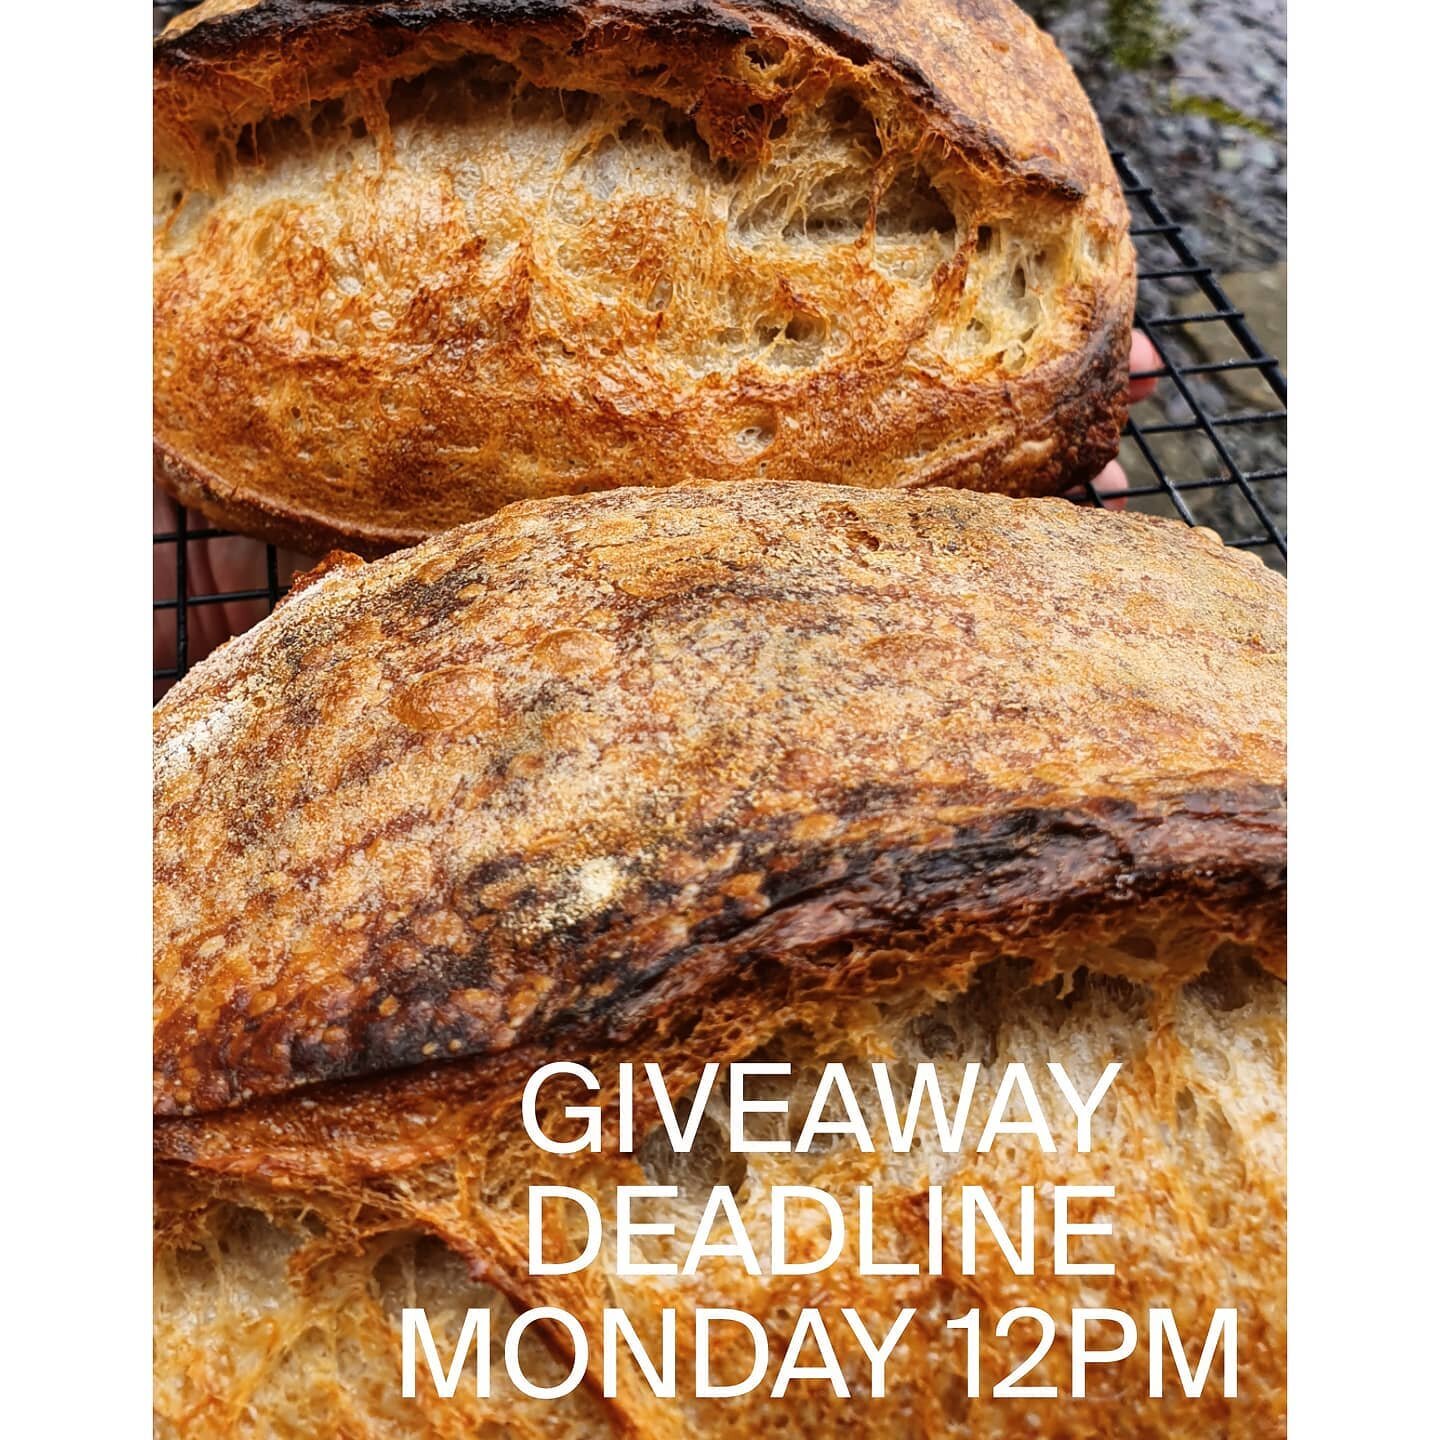 I'll be back delivering fresh sourdough next Saturday! 

There's still time to enter my giveaway! Deadline is Monday @ 12PM. 

Add this post to your story, and leave a comment letting me know something you'd like to see on my menu. A lucky winner wil